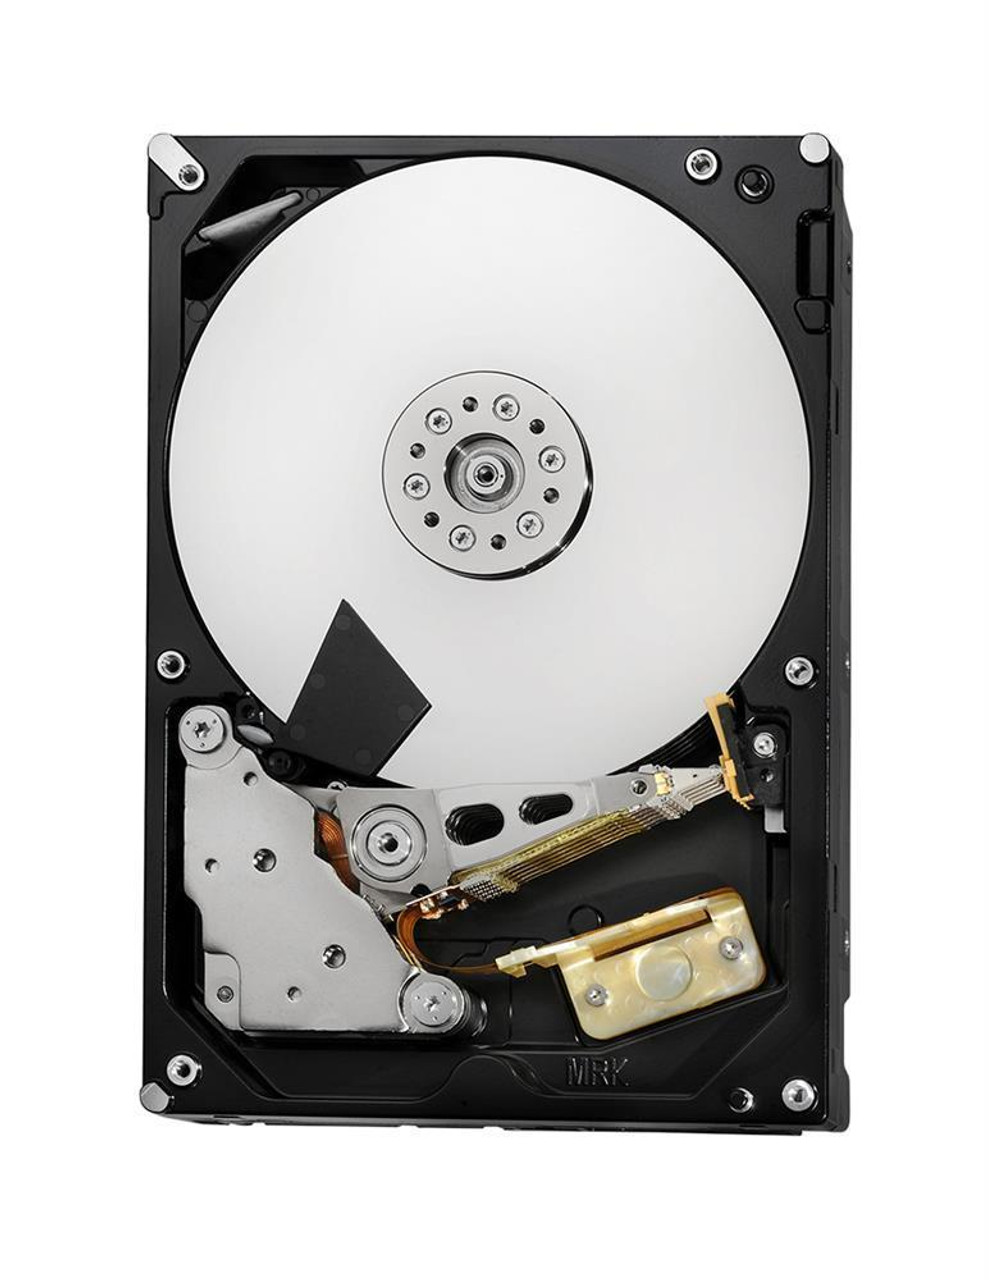 CCS-HDD-300GB Cisco 300GB 15000RPM Ultra-320 SCSI 3.5-inch Internal Hard Drive for x80 Content Security Appliances